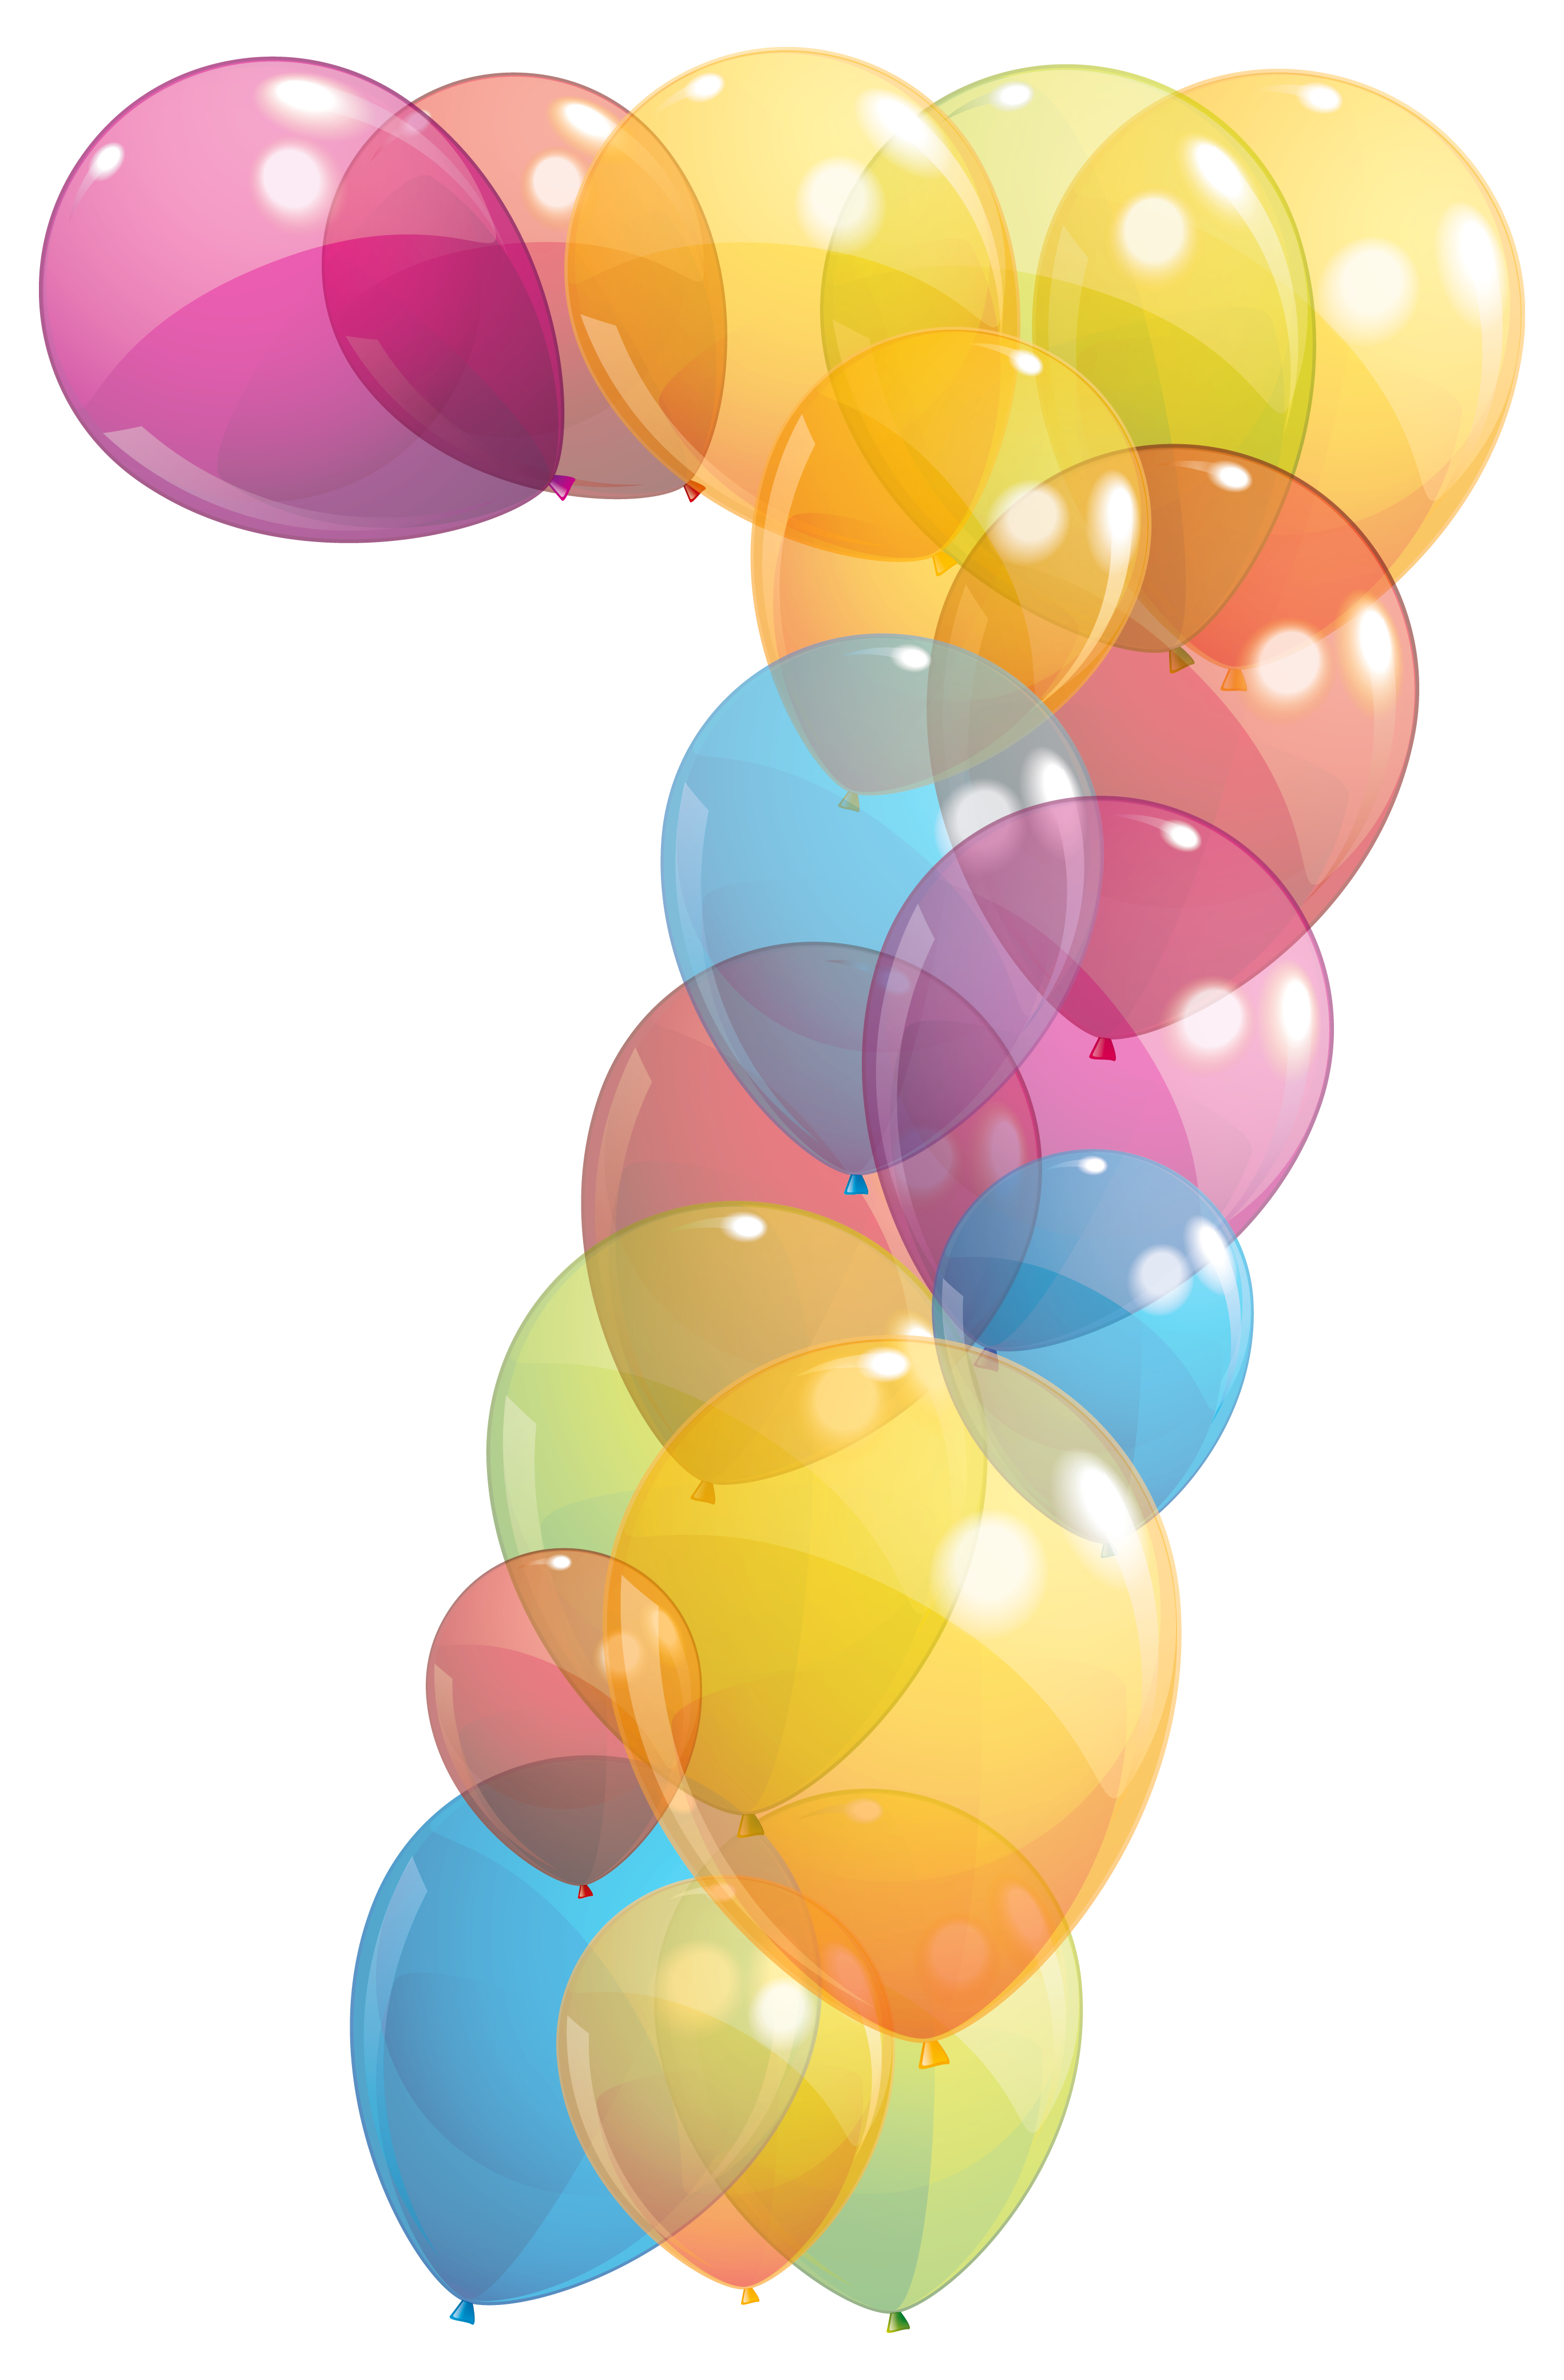 Transparent Seven Number of Balloons PNG Clipart Image.